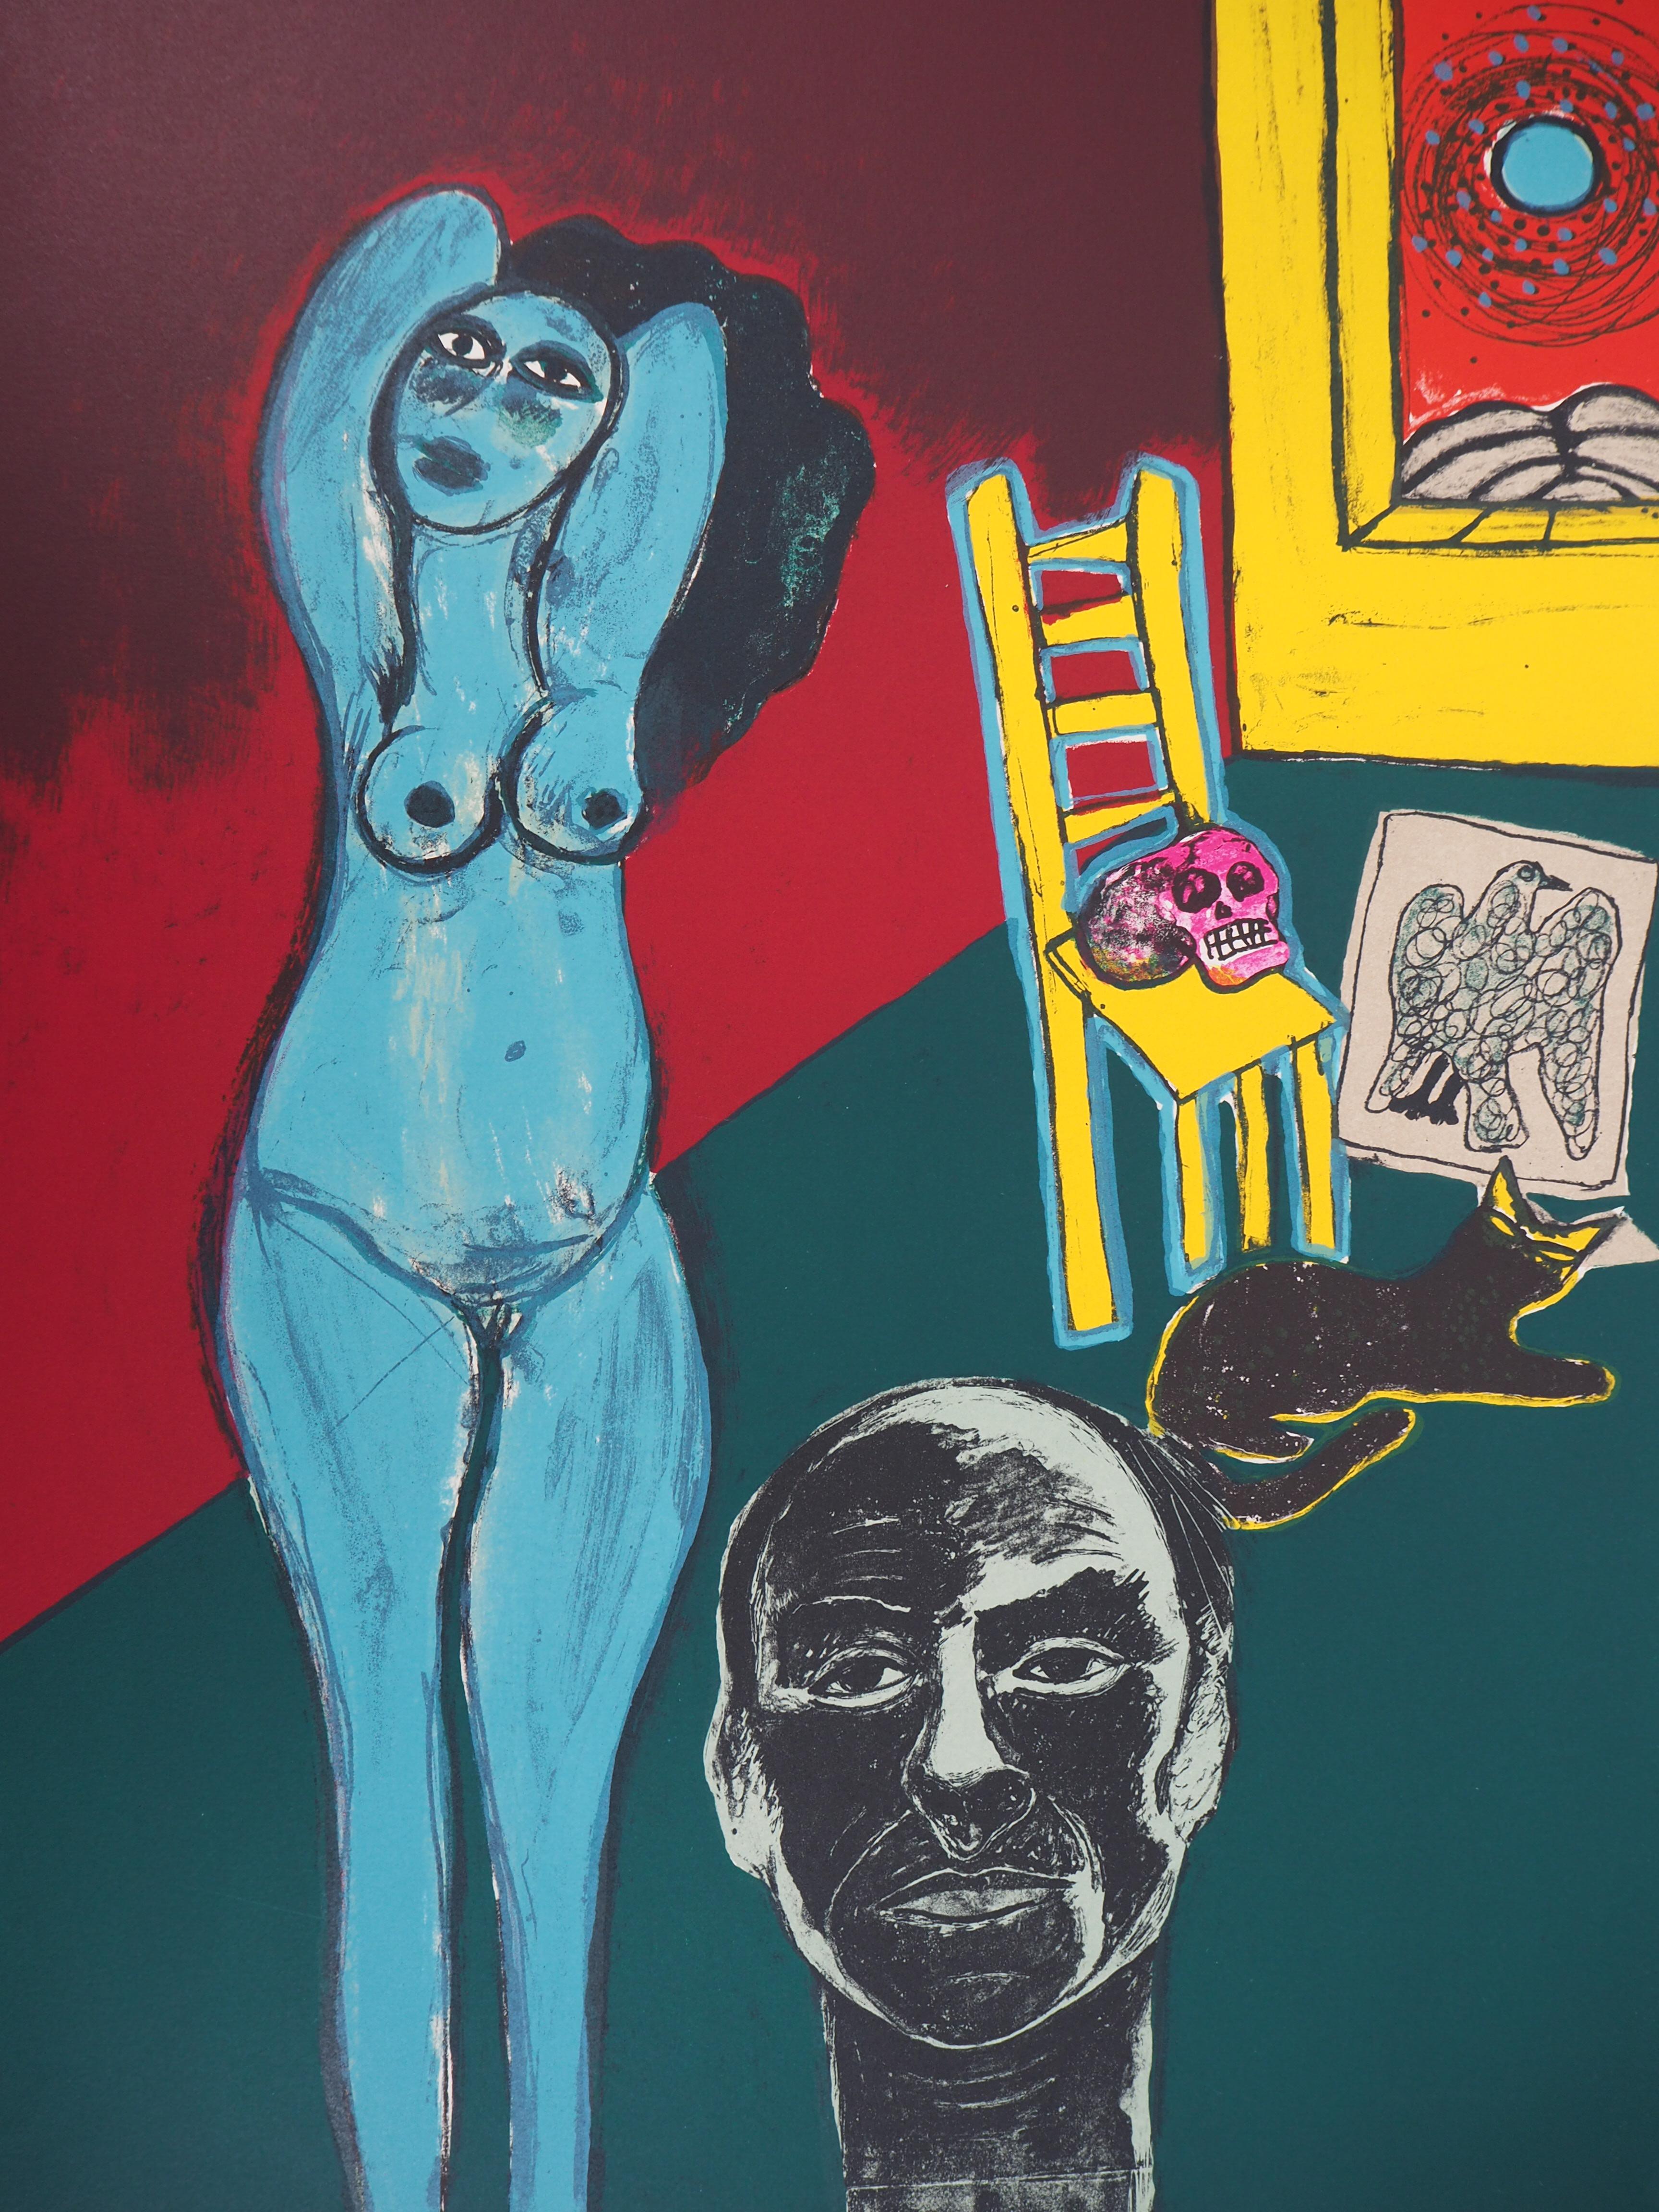 Selfportrait with Blue Nude and Mexican Skull - Original handsigned lithograph - Print by Corneille